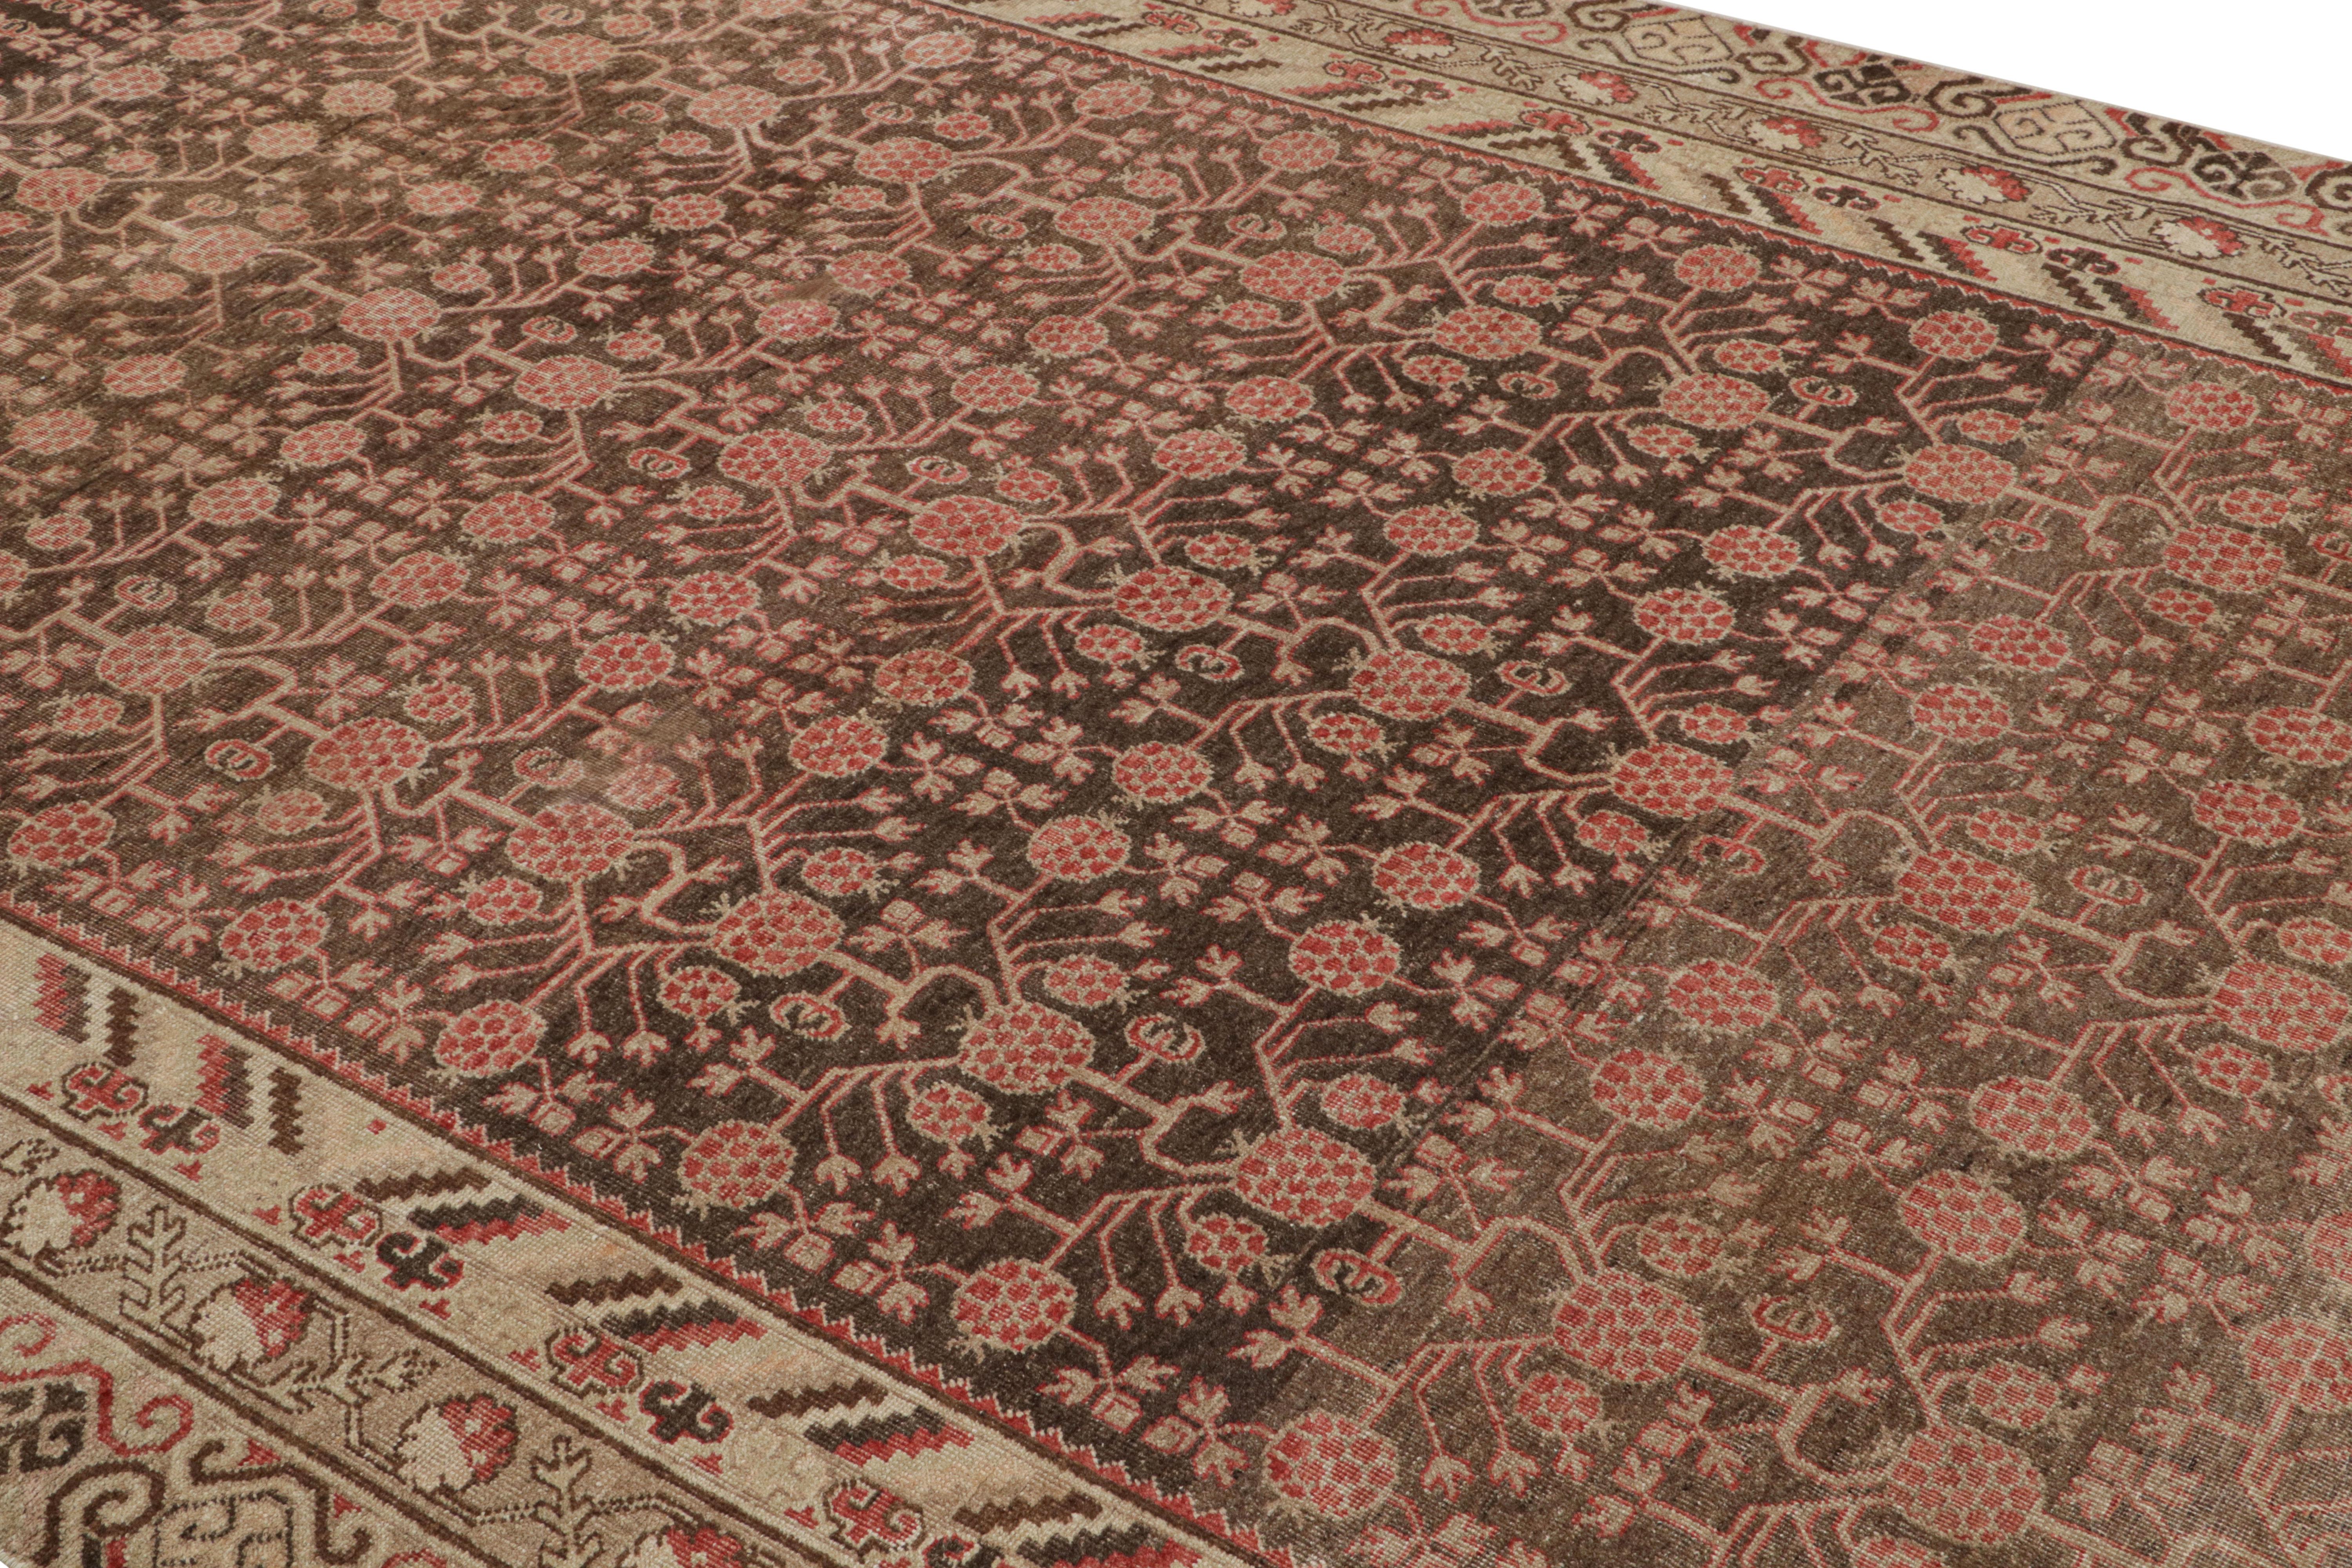 Hand knotted in wool originating from East Turkestan circa 1890-1900, this antique rug connotes a Classic Khotan rug design with a Classic approach to transitional colorway celebrated in this oriental rug family. Further enjoying the Classic